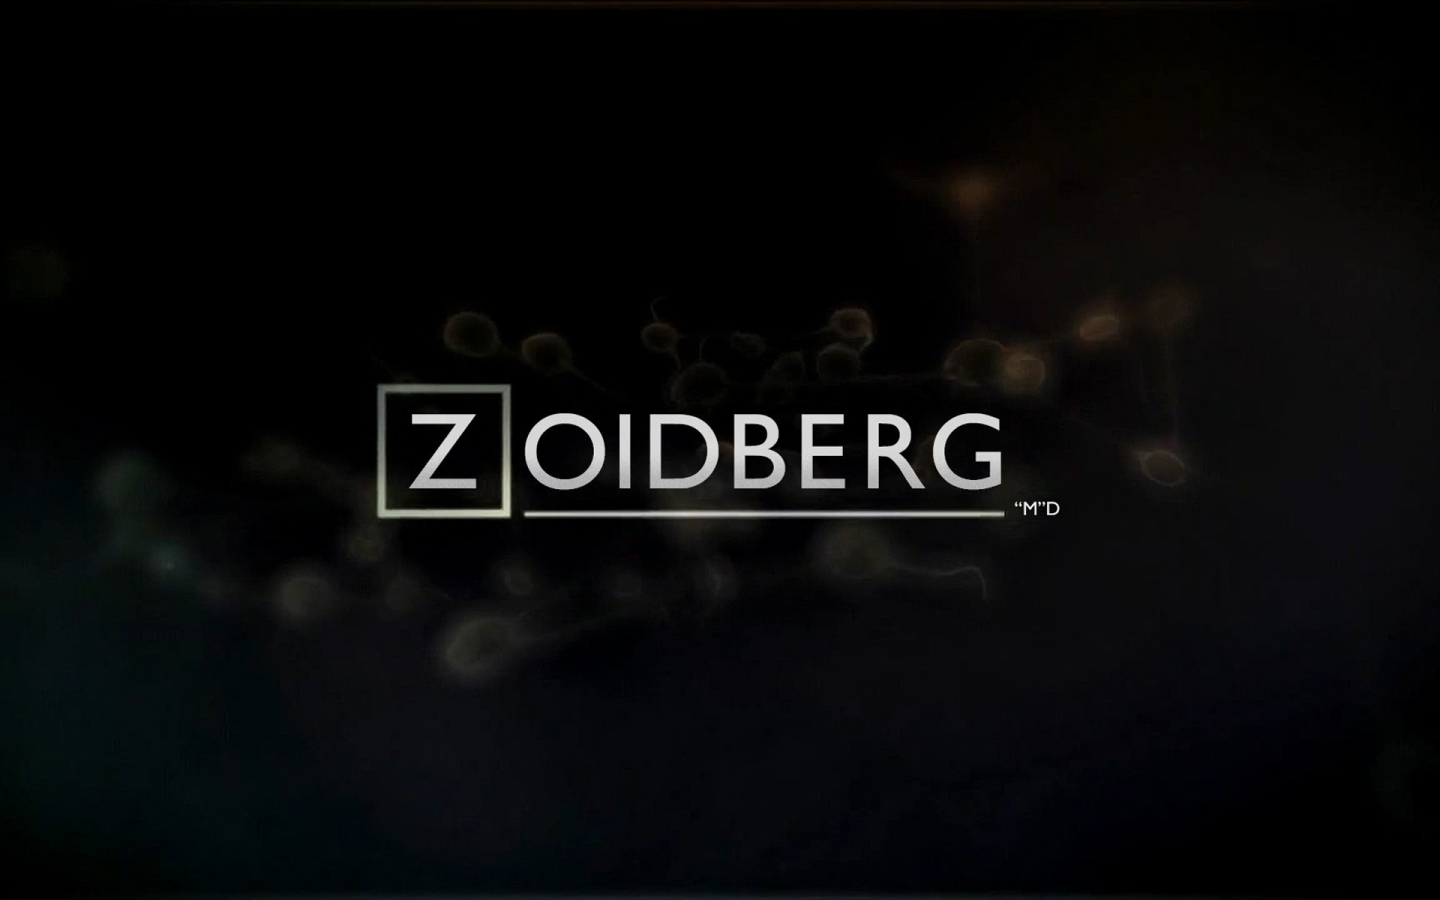 Zoidberg MD for 1440 x 900 widescreen resolution